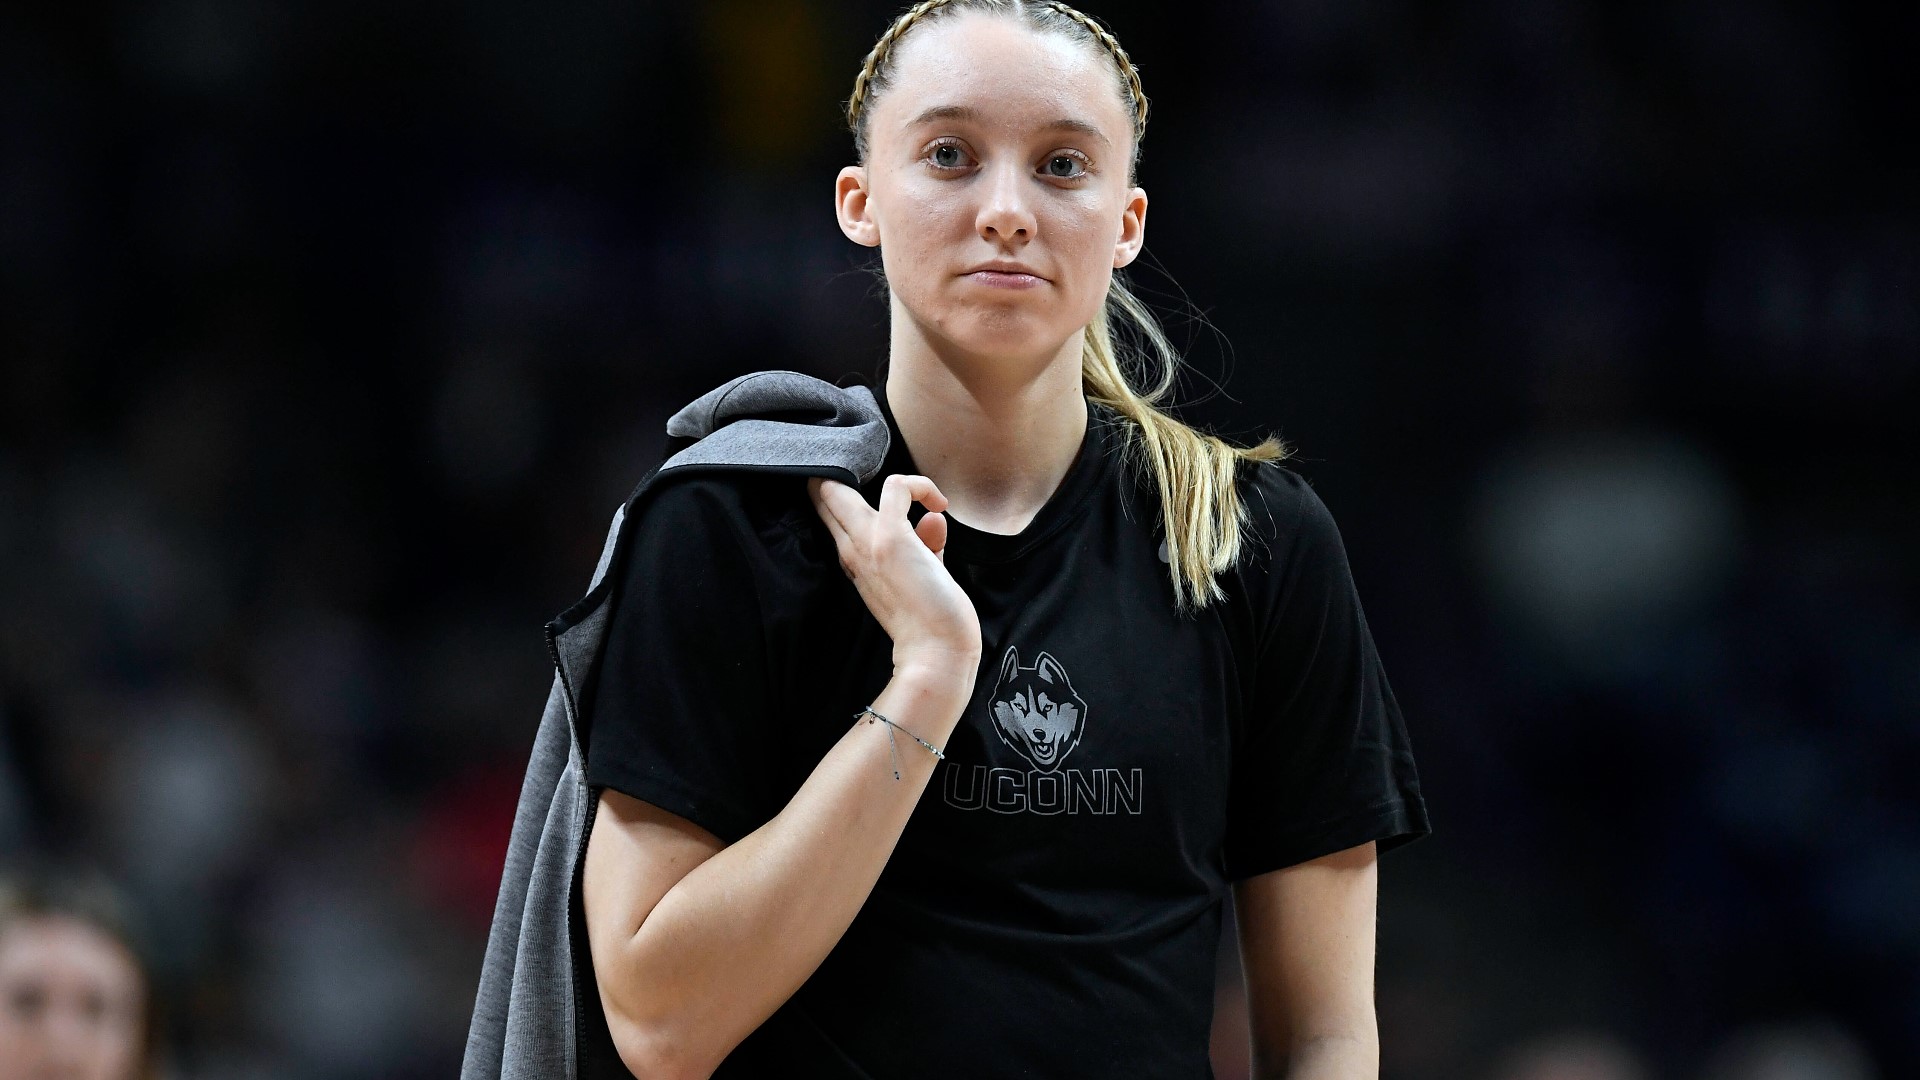 UConn women's basketball star Paige Bueckers confirms she is cleared to return to the court after sitting out last season to recover from a torn ACL.